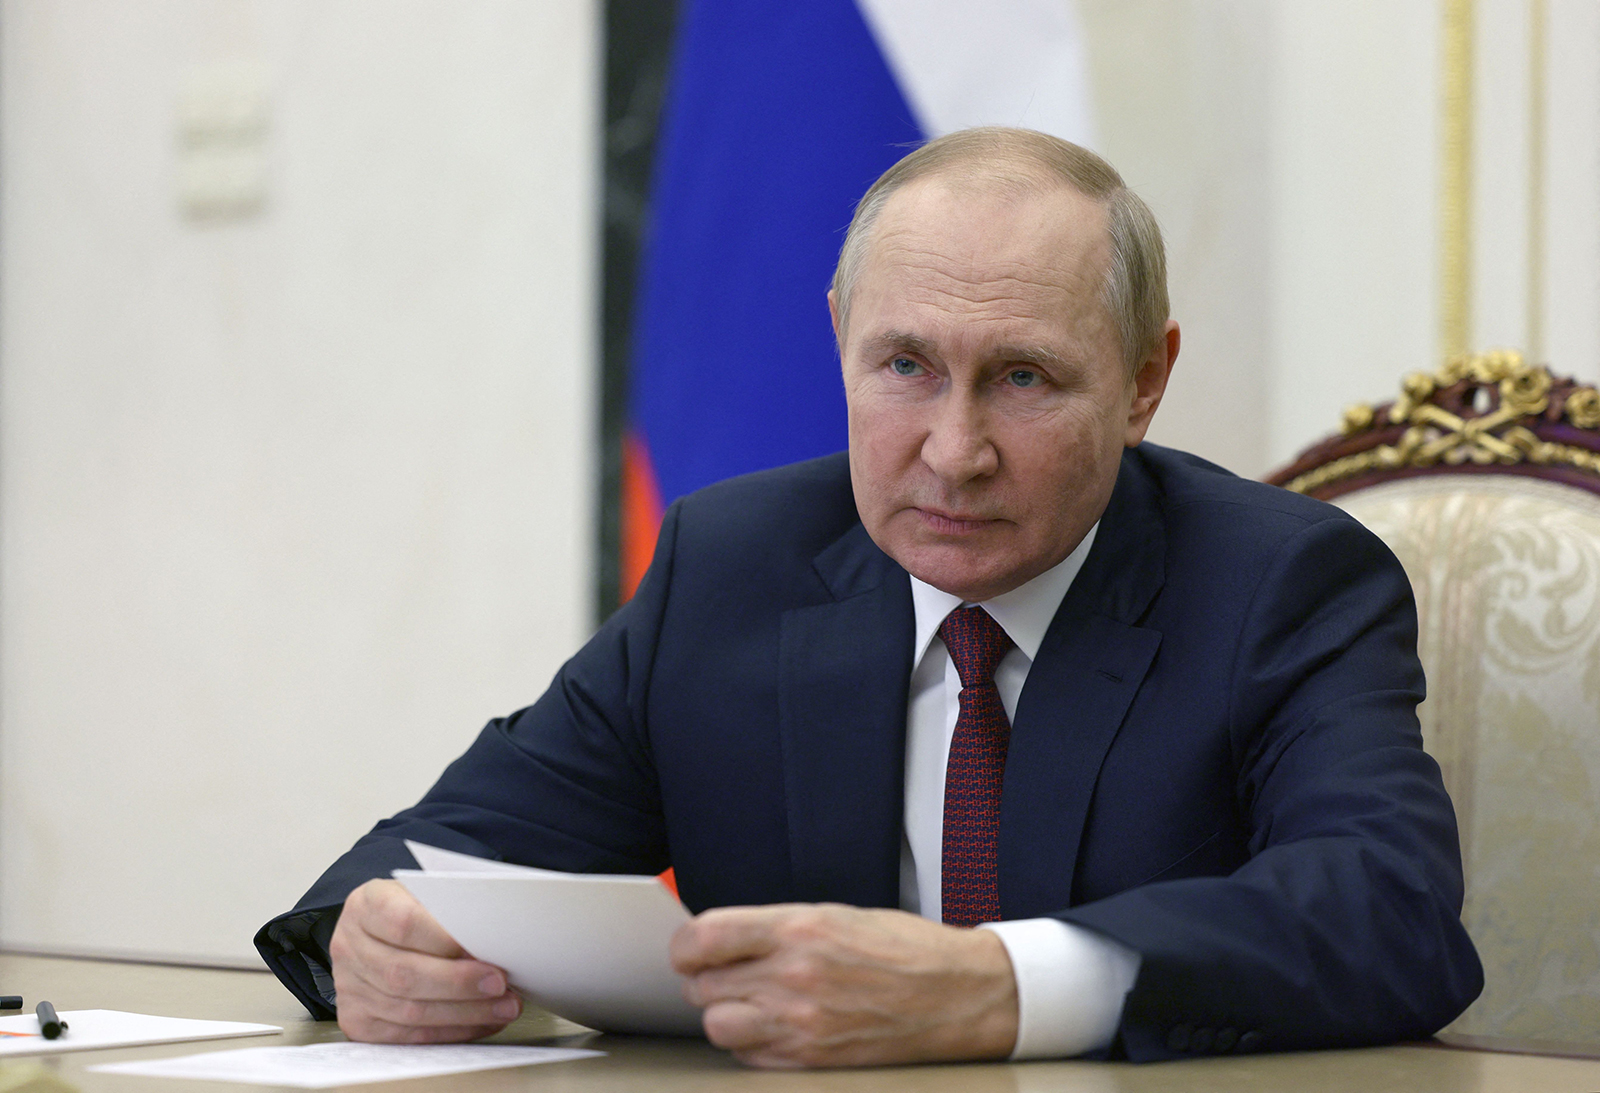 Russian President Vladimir Putin chairs a meeting via a video link in Moscow on September 29.